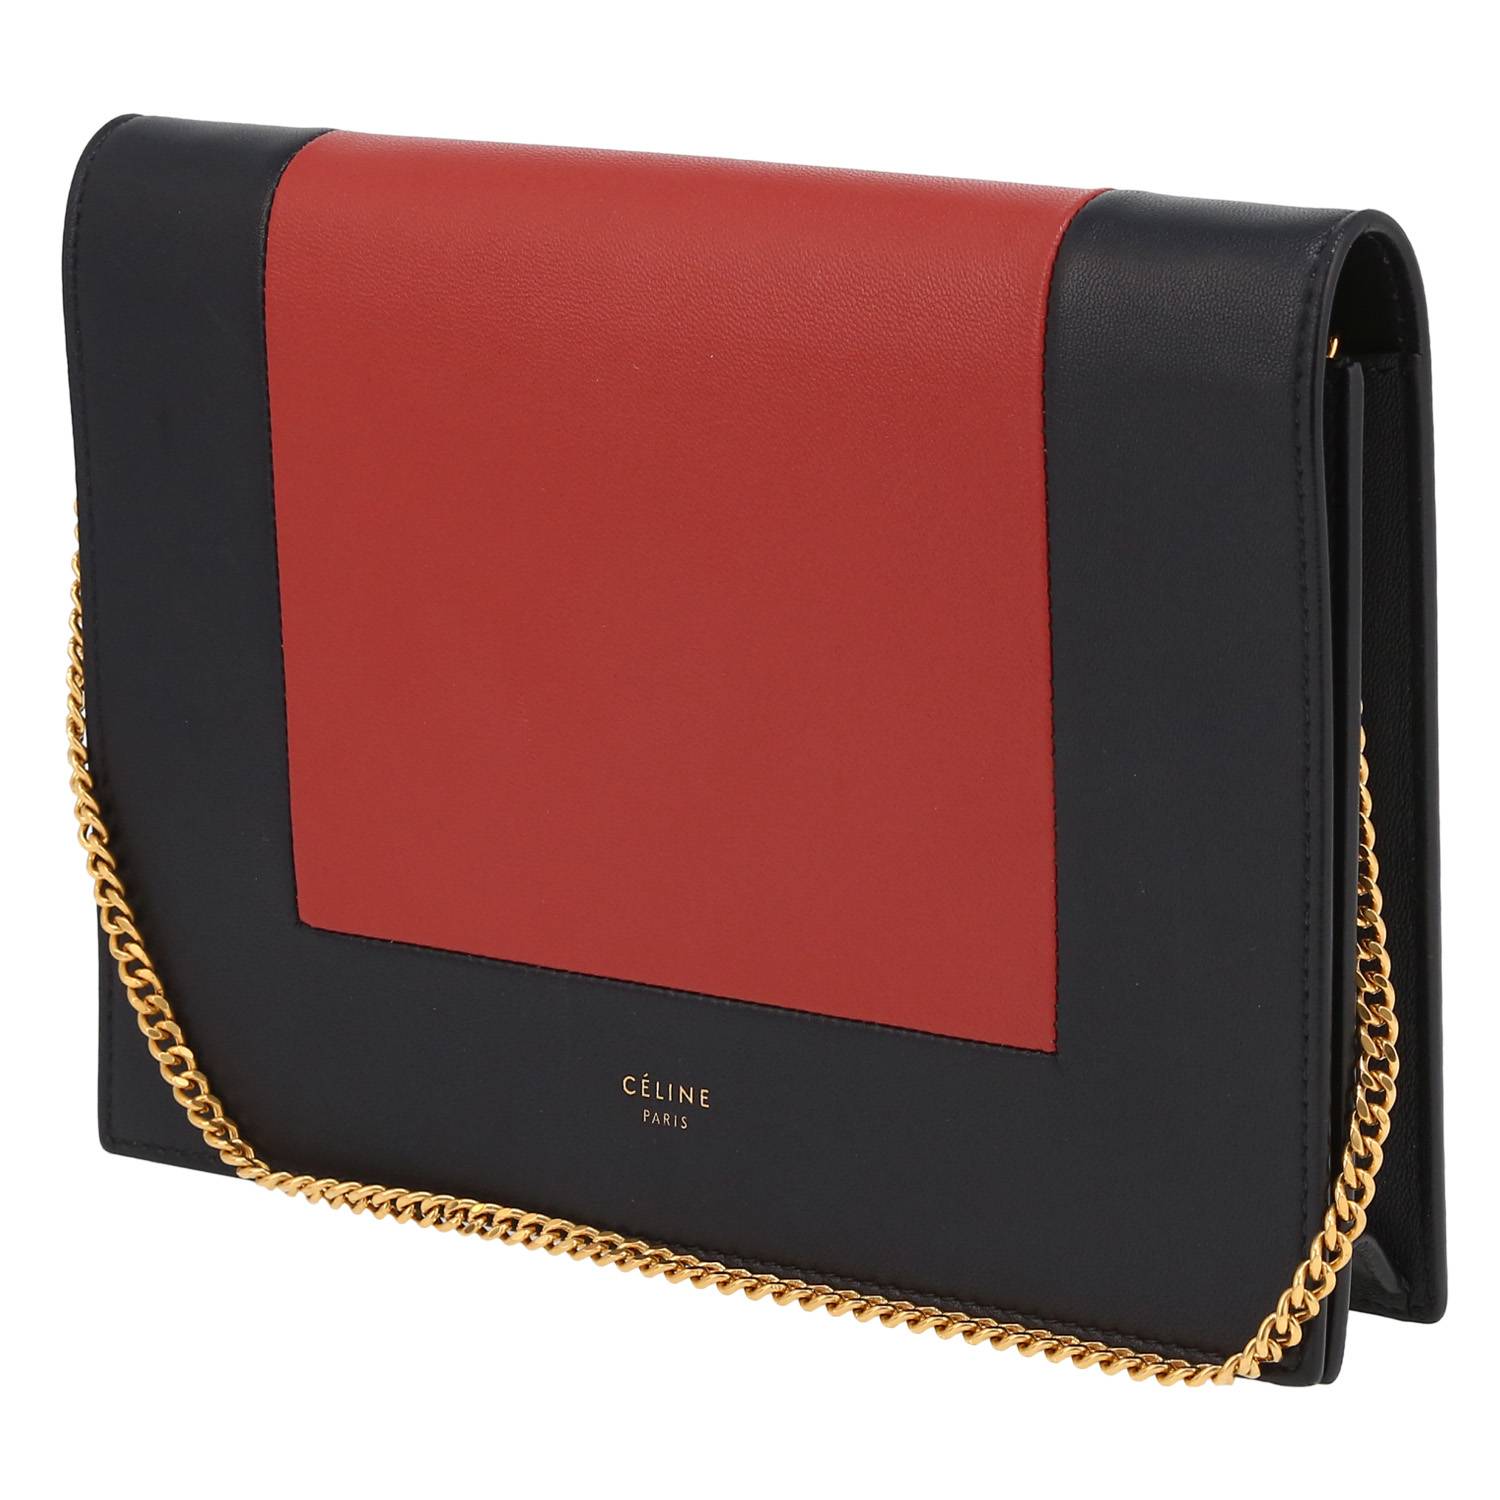 Handbag/Clutch In Blue And Red Leather